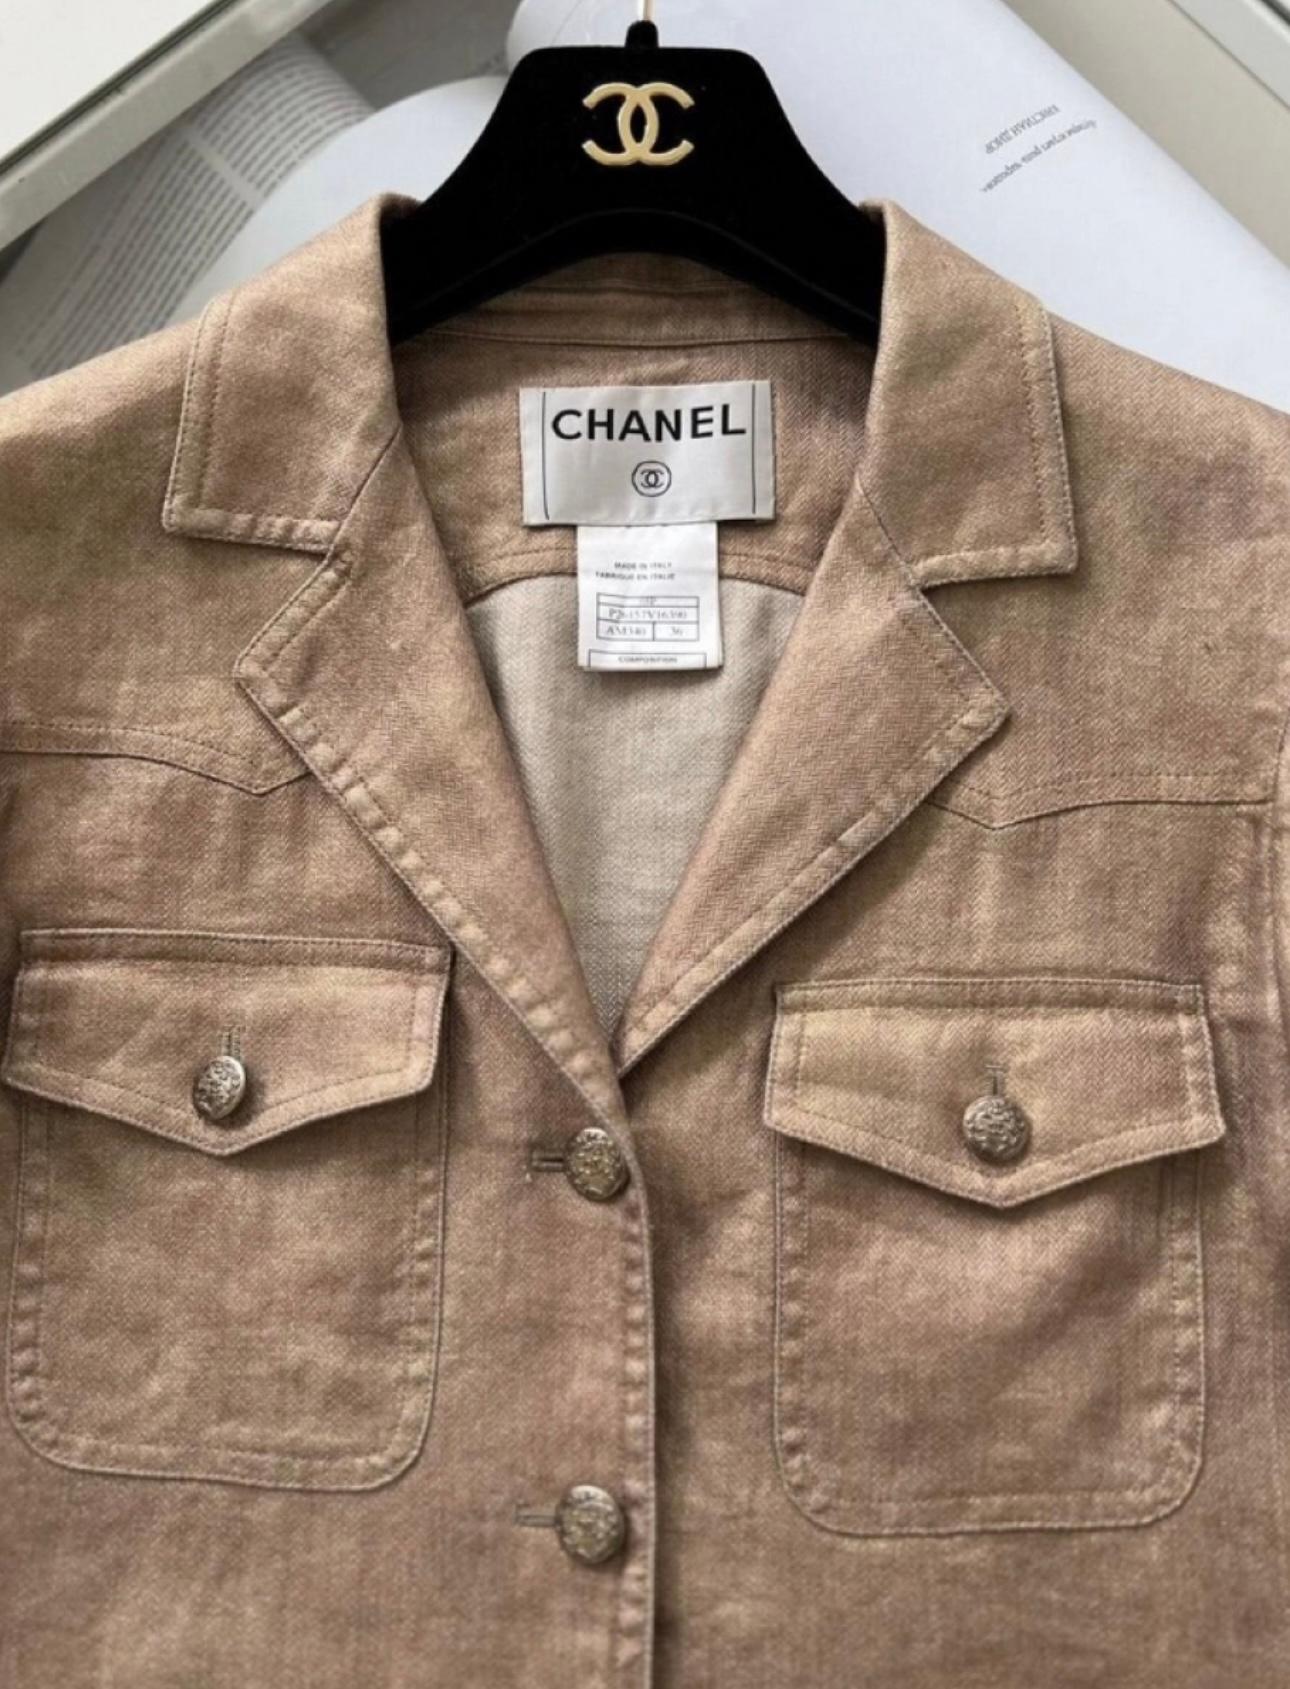 Chanel linen and silk jacket with CC logo buttons.
Iconic 4-flap-pockets silhouette
Size mark 36 FR. Pristine condition.